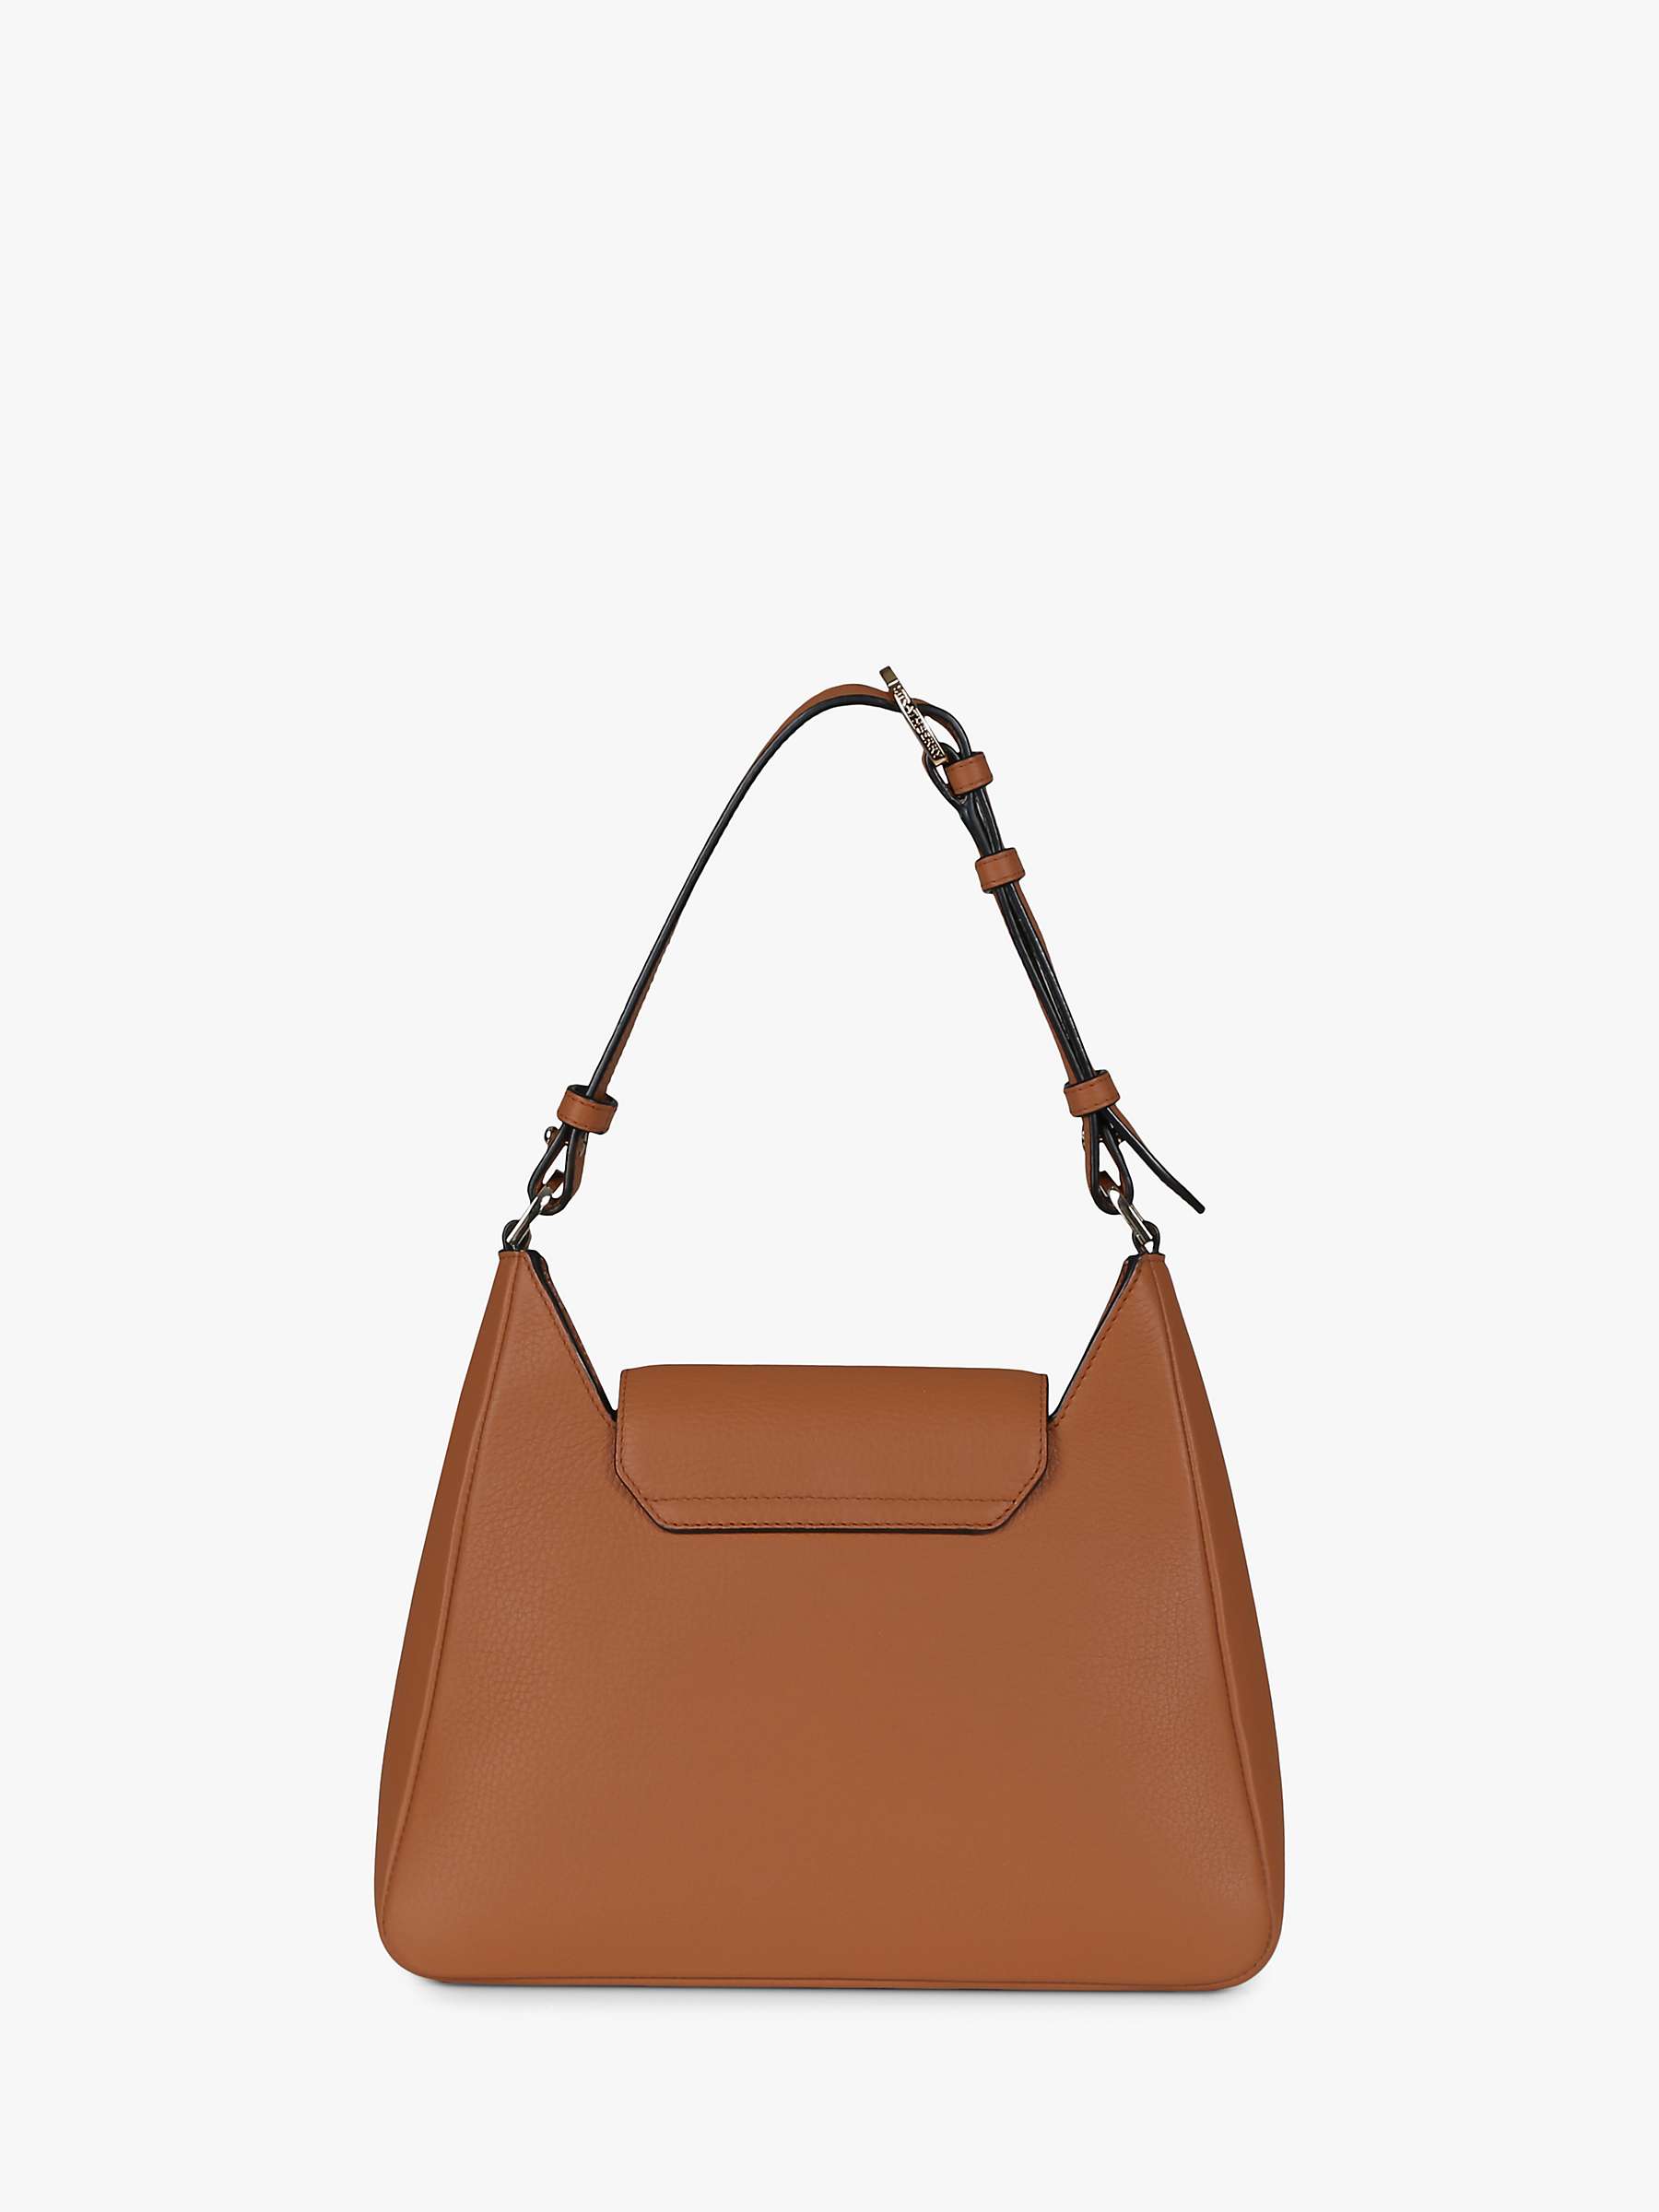 Buy Strathberry Multrees Leather Hobo Bag Online at johnlewis.com